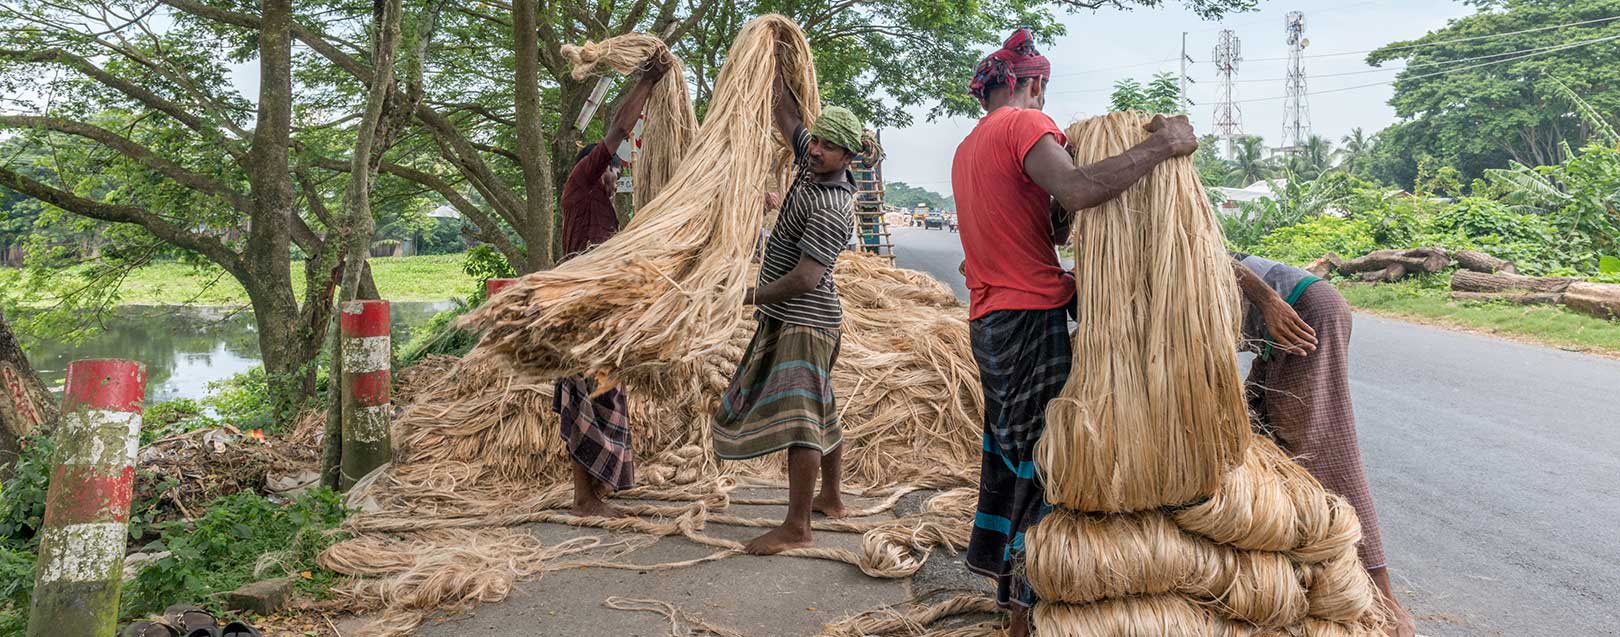 DGAD proposes 5-20% anti-dumping duty on jute imports